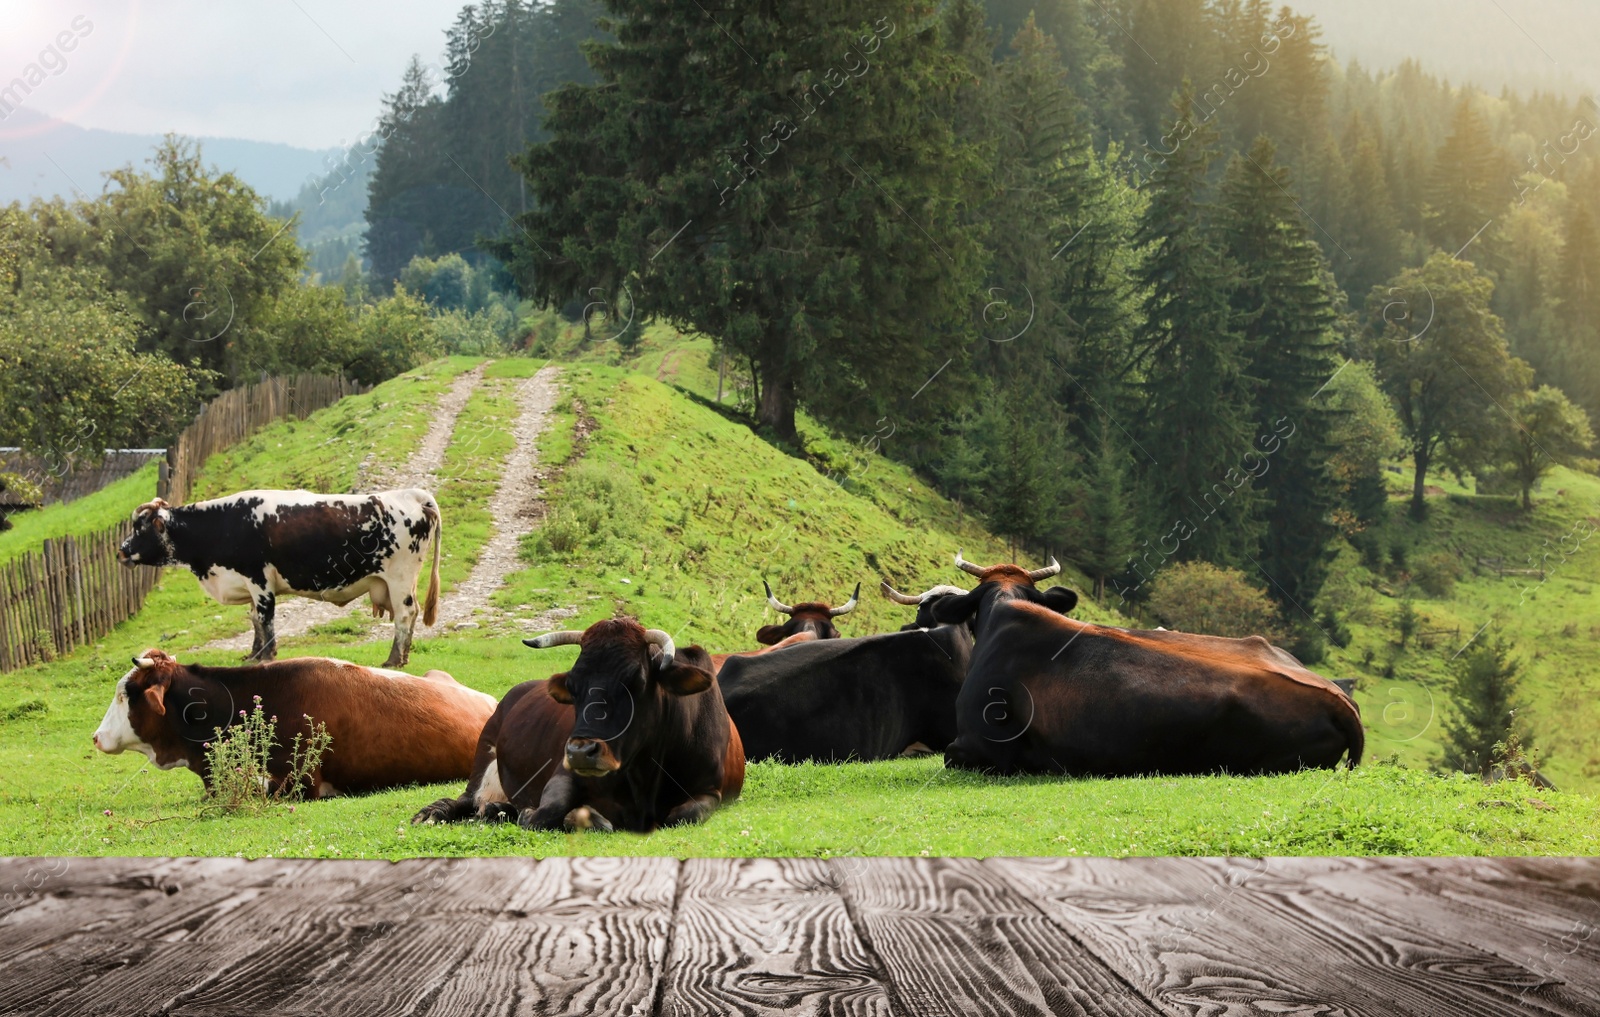 Image of Empty wooden table and cows resting near conifer forest on background. Animal husbandry concept 